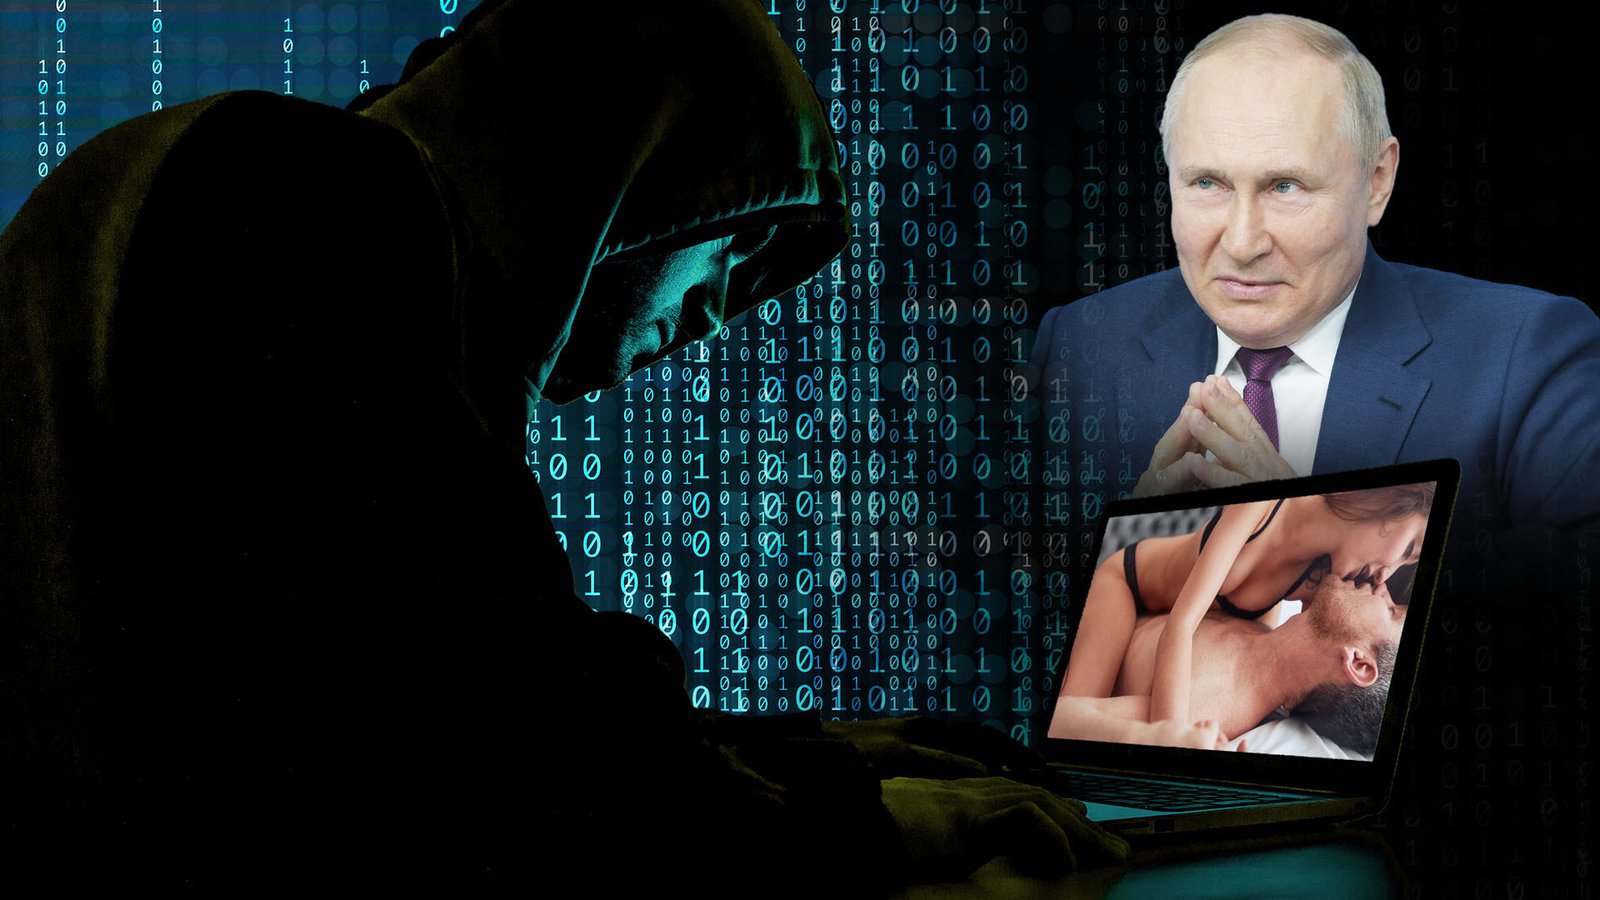 How Putin is poised to weaponise AI created deep fake PORN with his cyber army in bid tear down democracies in the West